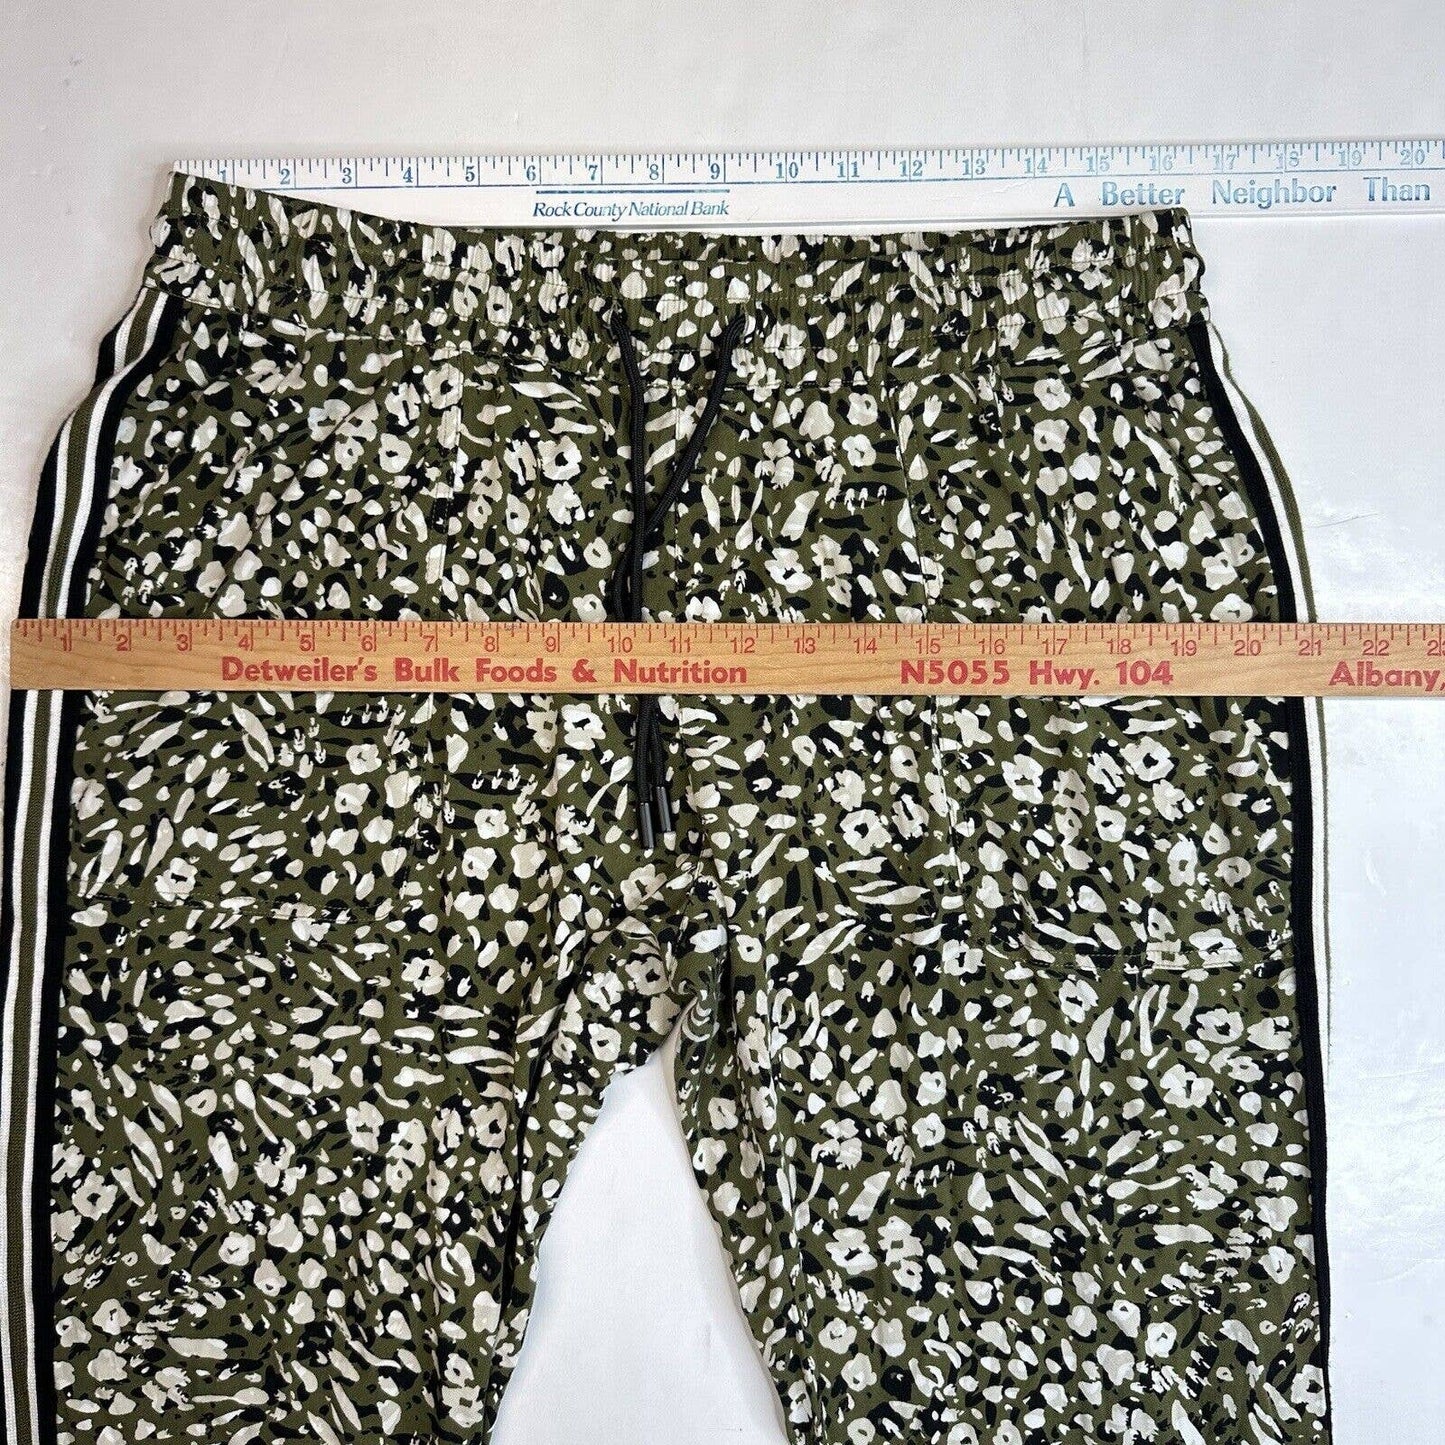 Liverpool Easy Fit Cropped Jogger Pant XL Green Animal Print Side Stripe Pull On